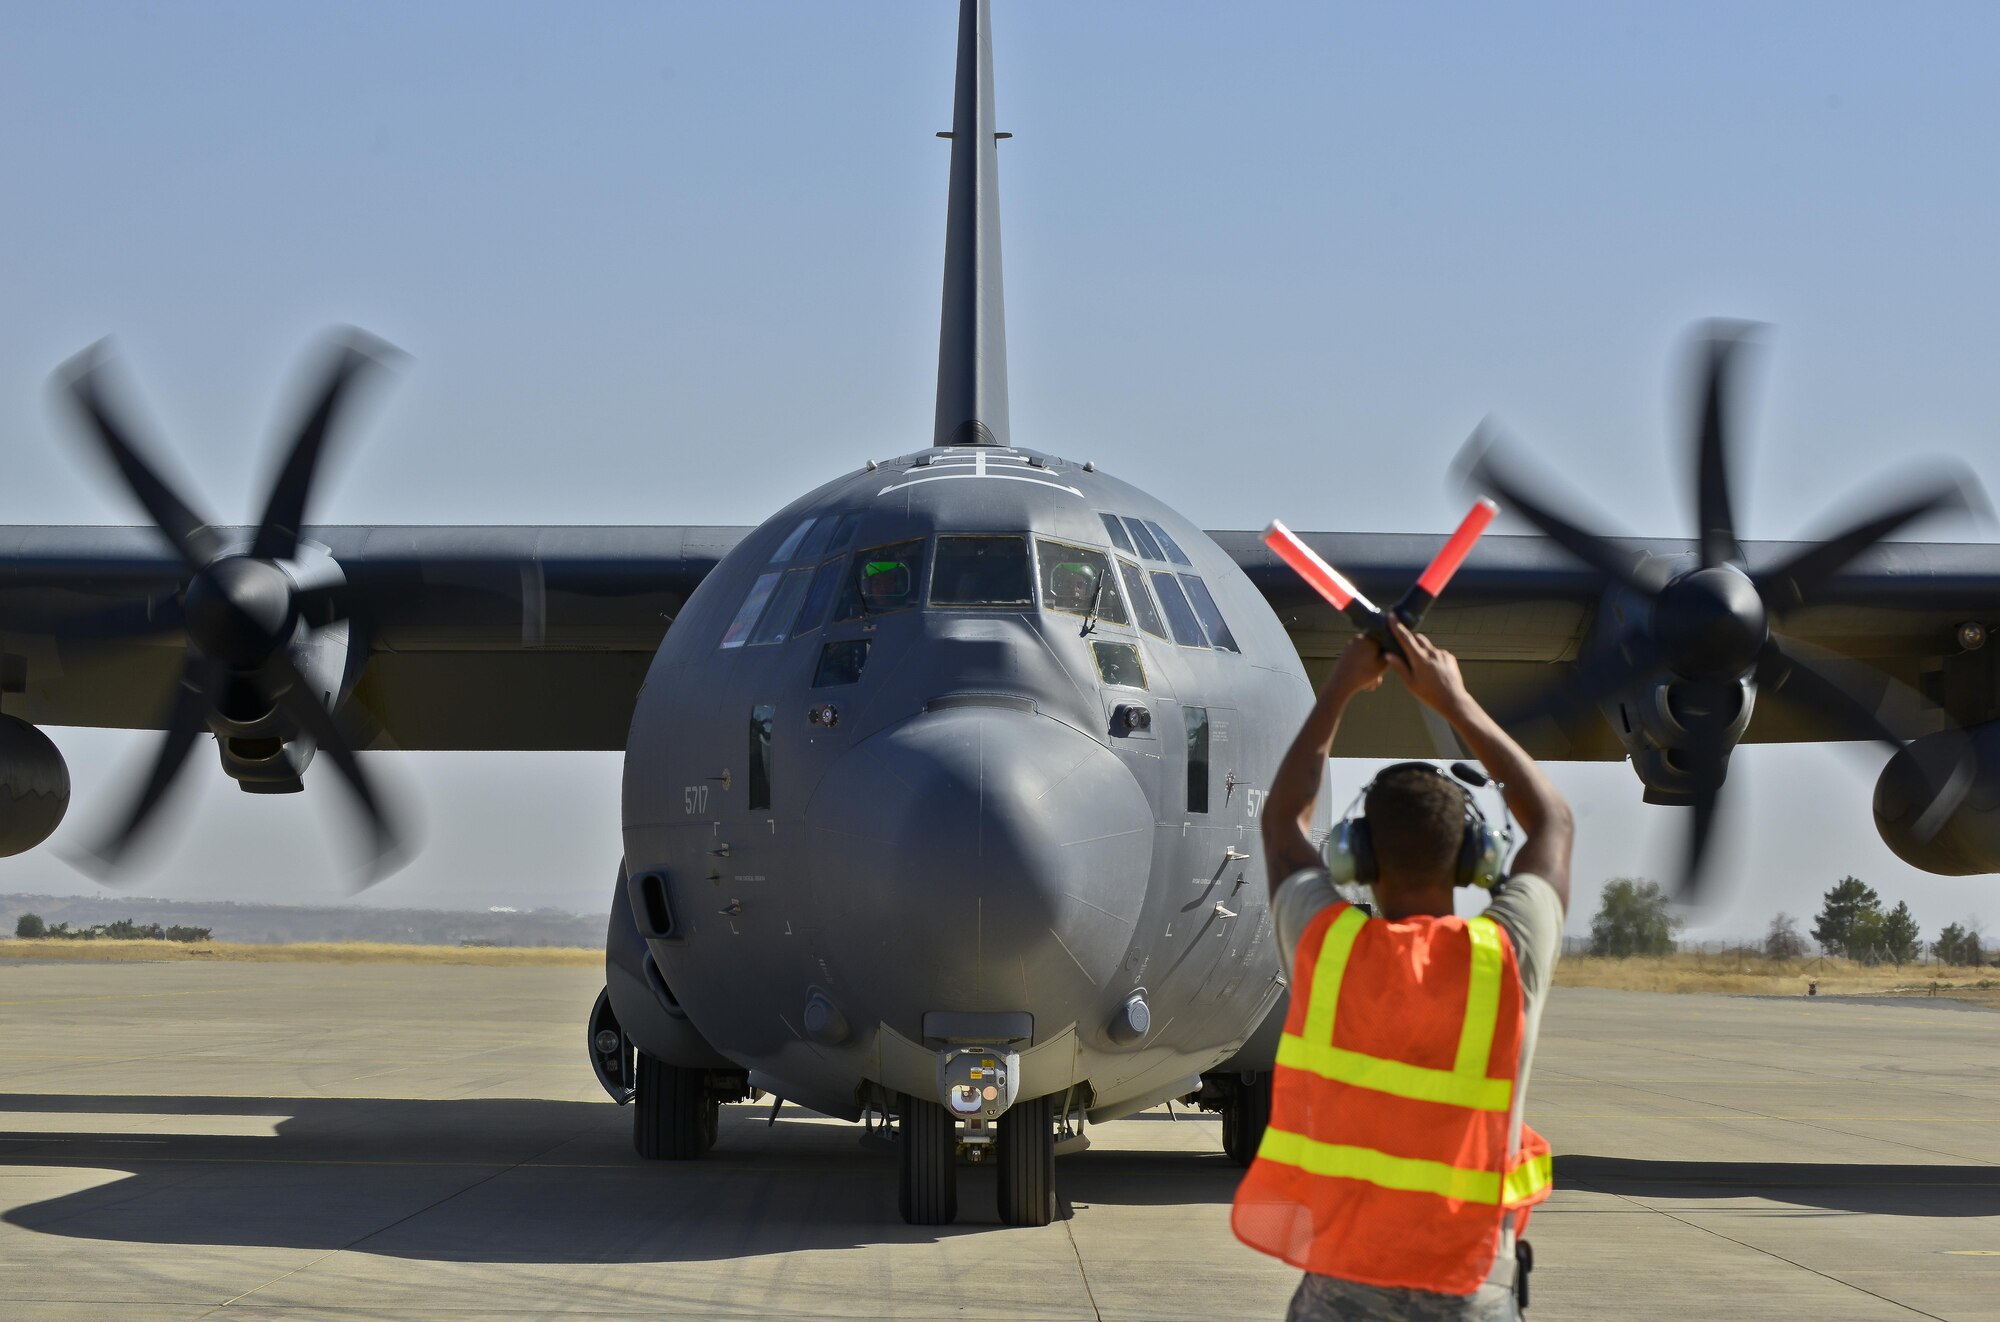 Senior Airman Trenton Mosley, a 435th Contingency Response Squadron contingency response crew chief, marshals a HC-130J Super Hercules Sept. 23, 2015, at Diyarbakir Air Base, Turkey. The aircraft delivered essential cargo to the Turkish installation as part of the U.S. Air Force’s staging of operations out of Diyarbakir AB to enhance coalition capabilities to support personnel recovery operations in Syria and Iraq. Diyarbakir AB is a Turkish base home to the Turkish air force's 8th Air Wing. (U.S. Air Force photo/Airman Cory W. Bush) 